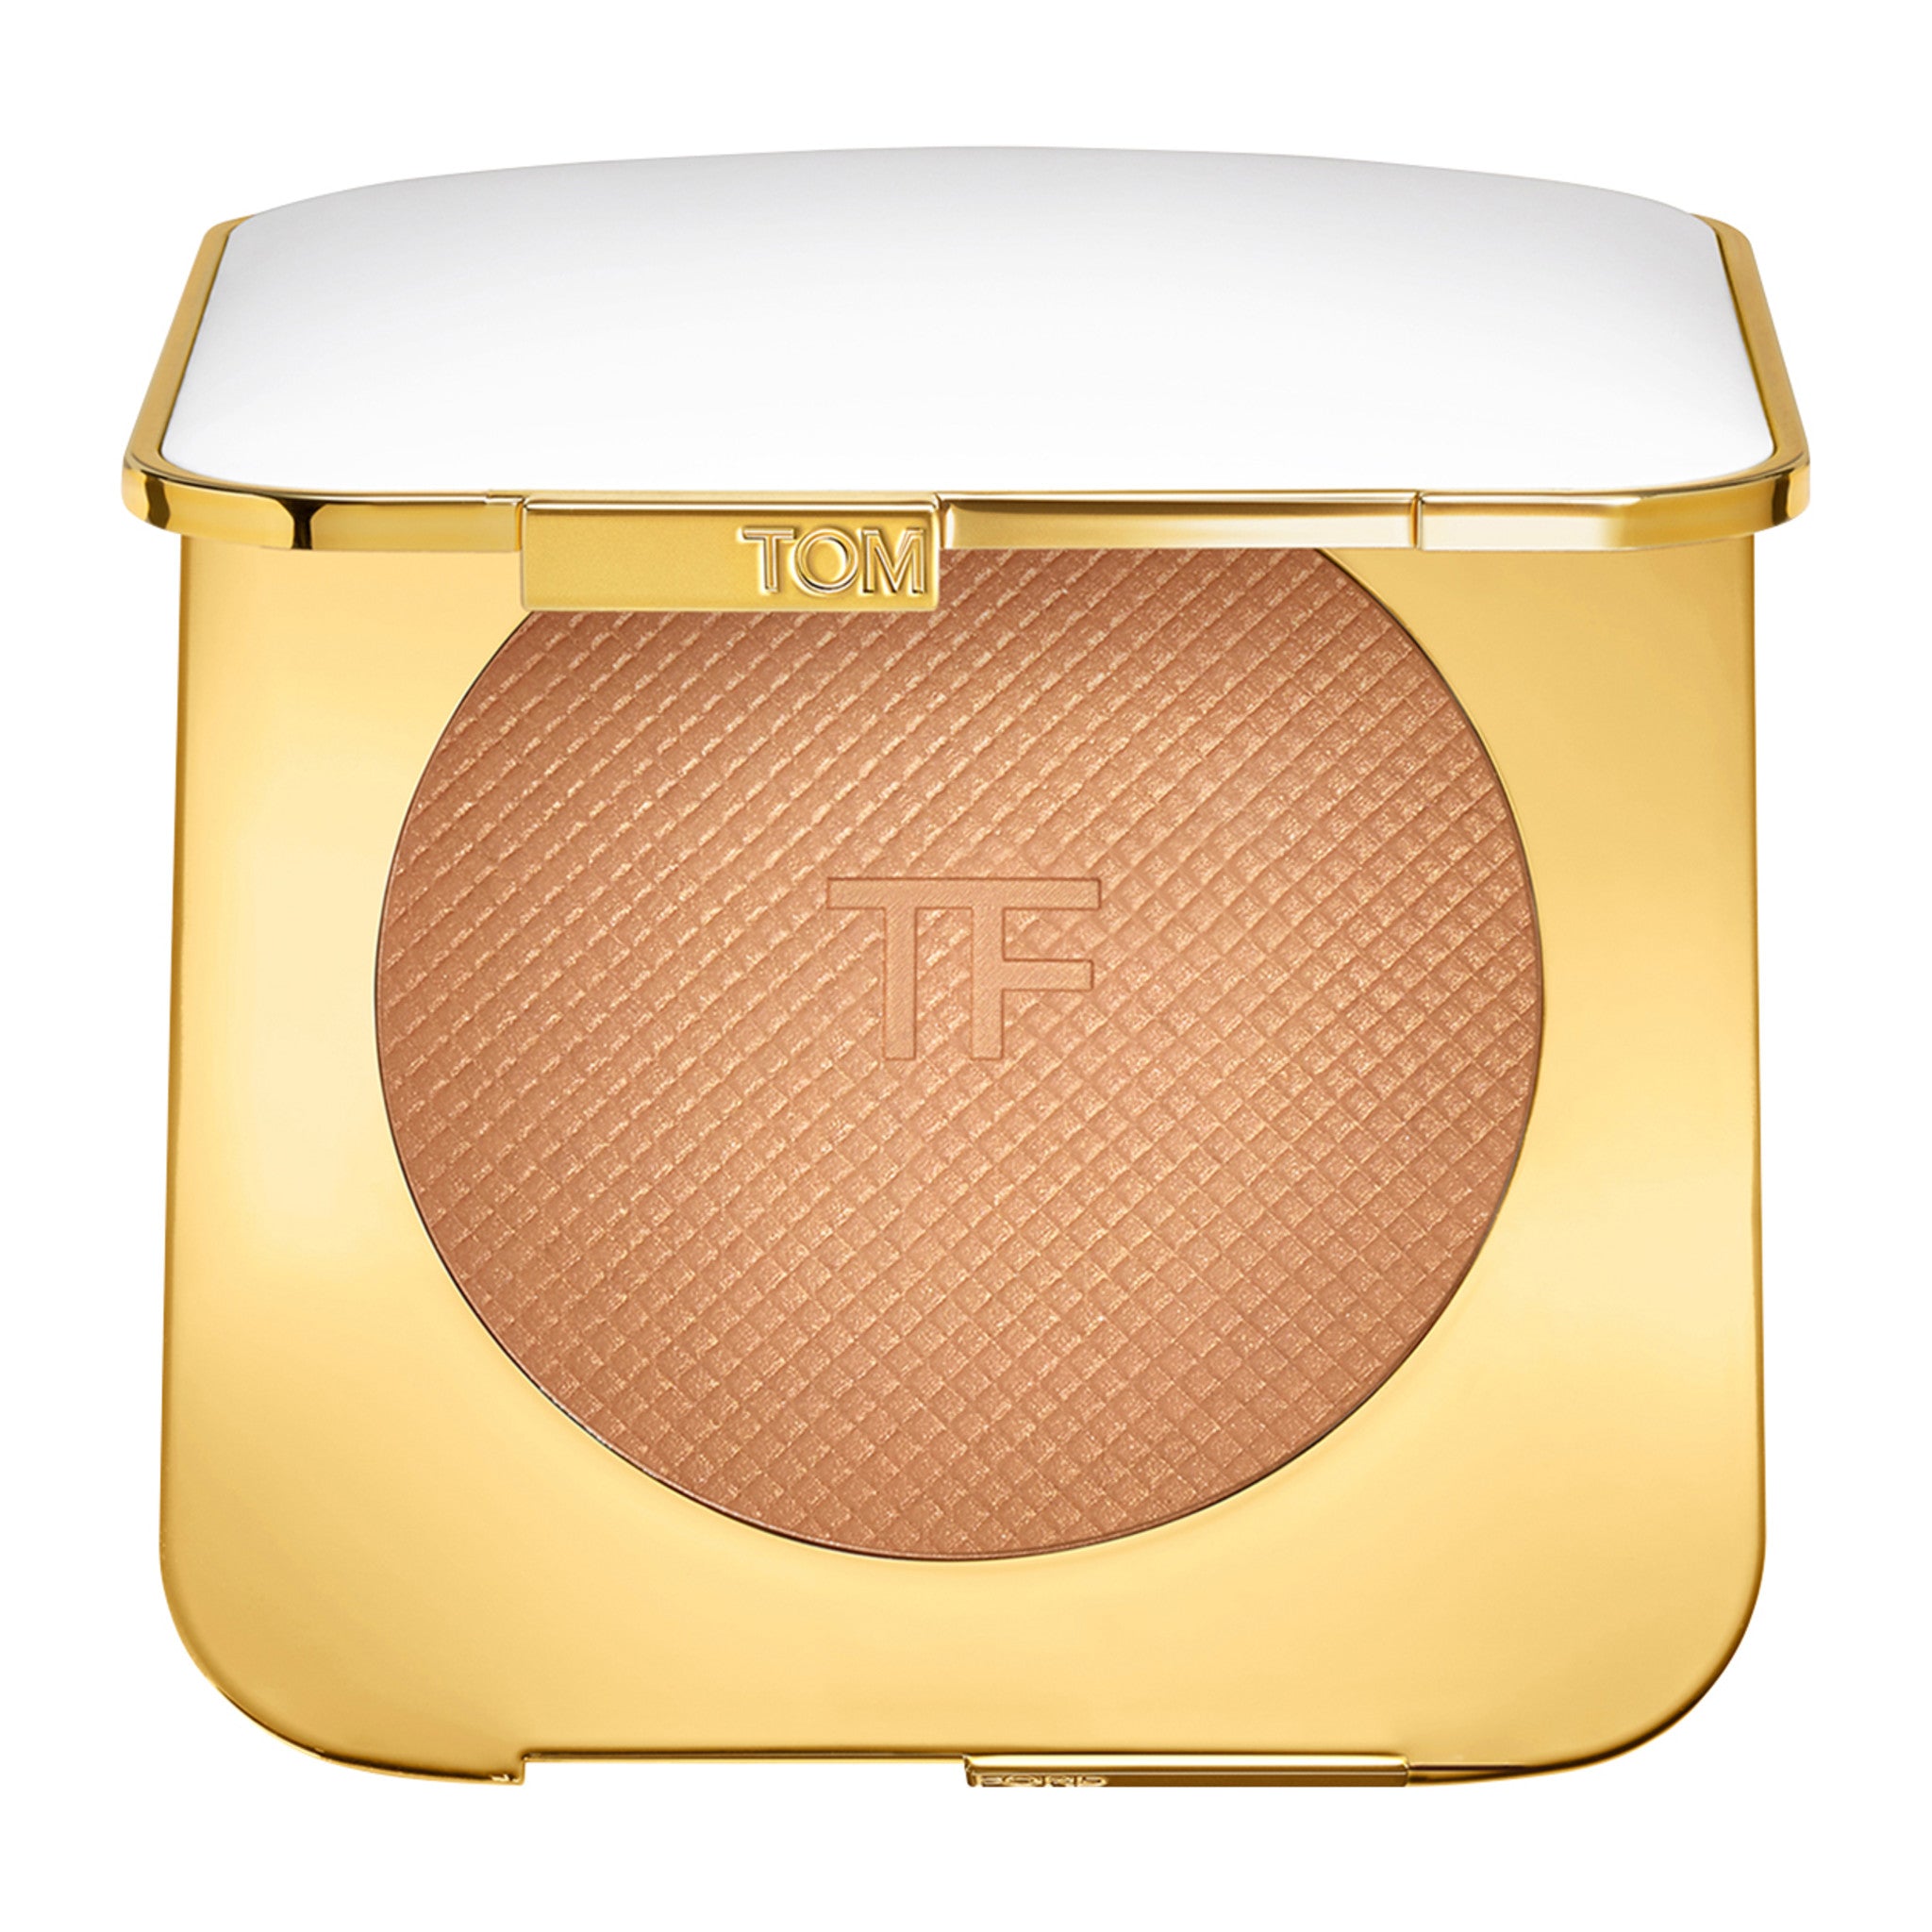 Tom Ford Soleil Glow Bronzer Color/Shade variant: Gold Dust SM main image.